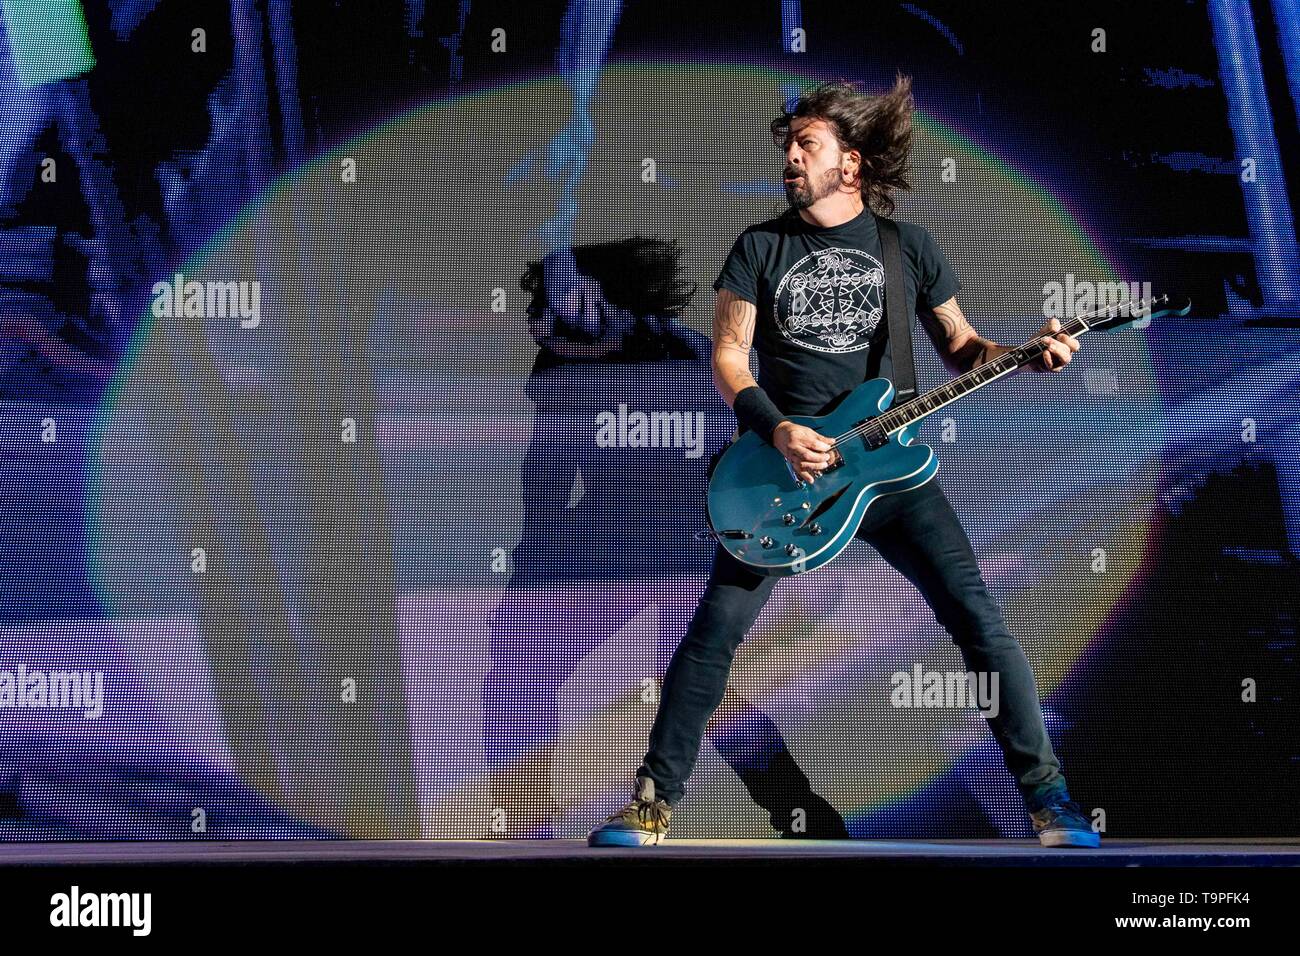 May 19, 2019 - Columbus, Ohio, U.S - of Foo Fighters during the Sonic Temple Music Festival at the MAPFRE Stadium in Columbus, Ohio (Credit Image: © Daniel DeSlover/ZUMA Wire) Stock Photo